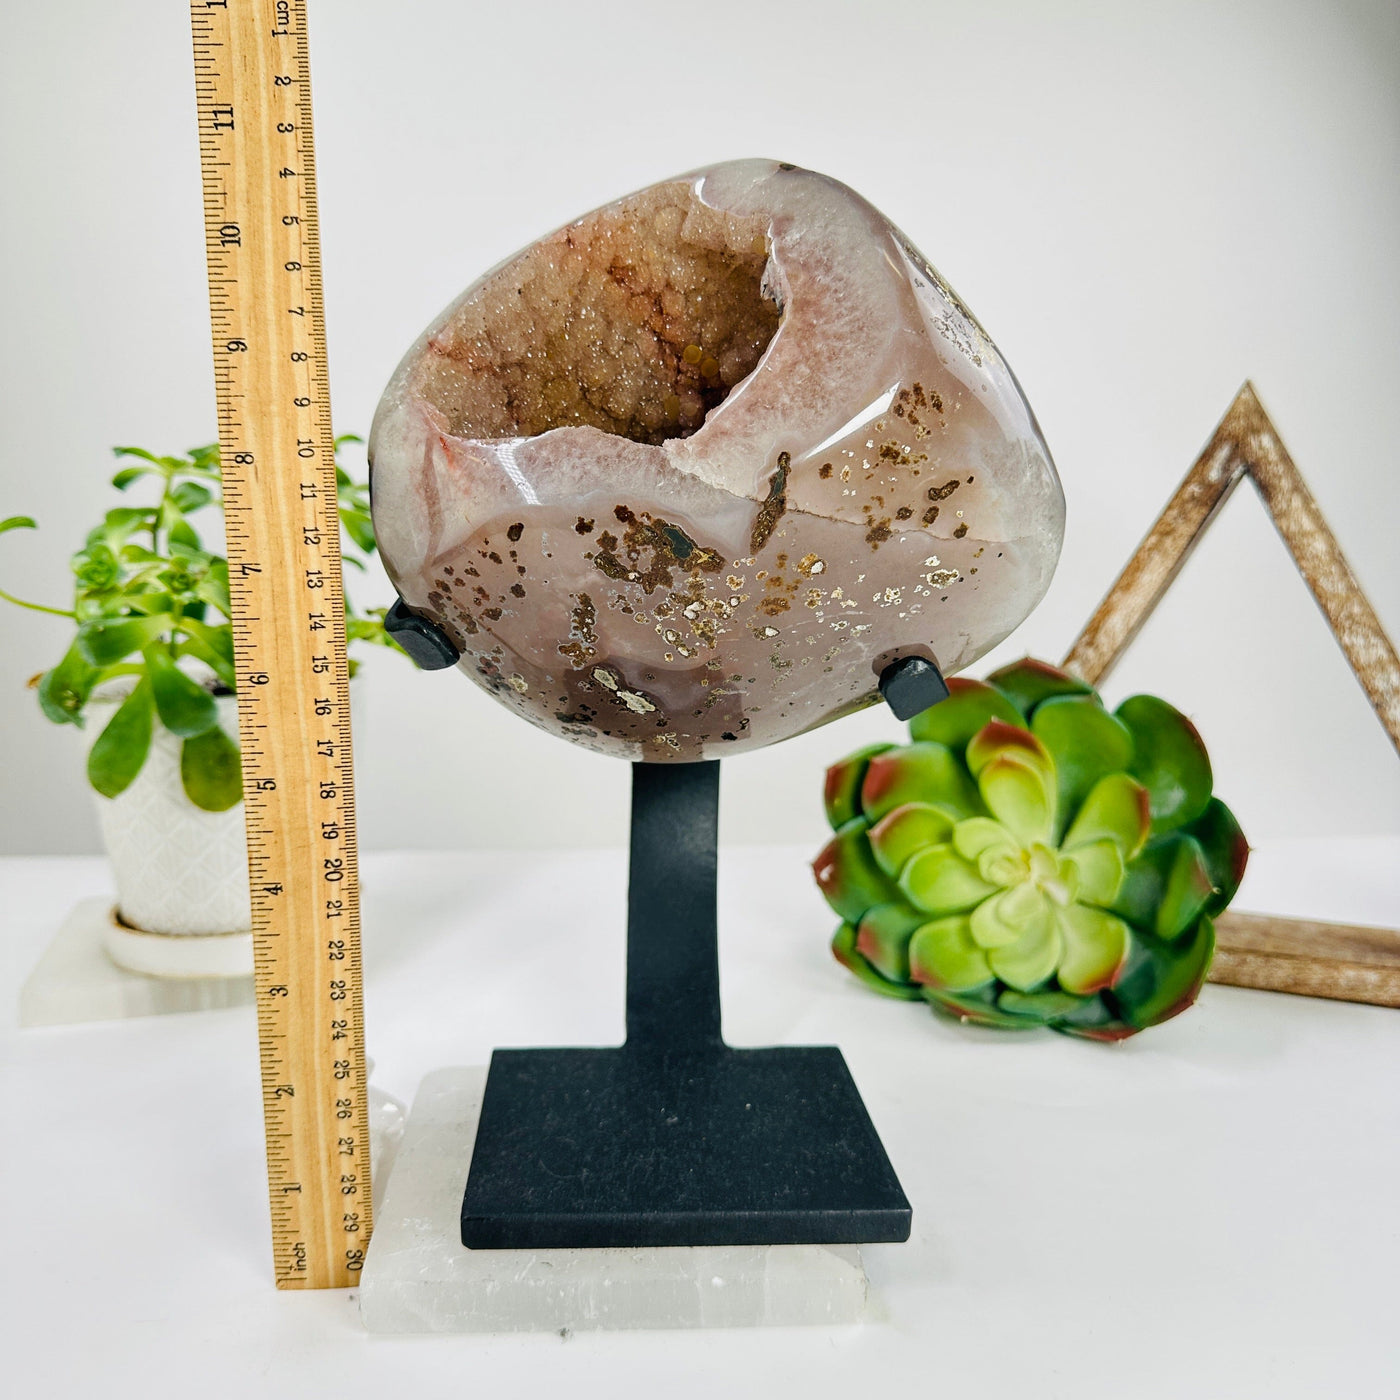 amethyst geode on stand next to a ruler for size reference